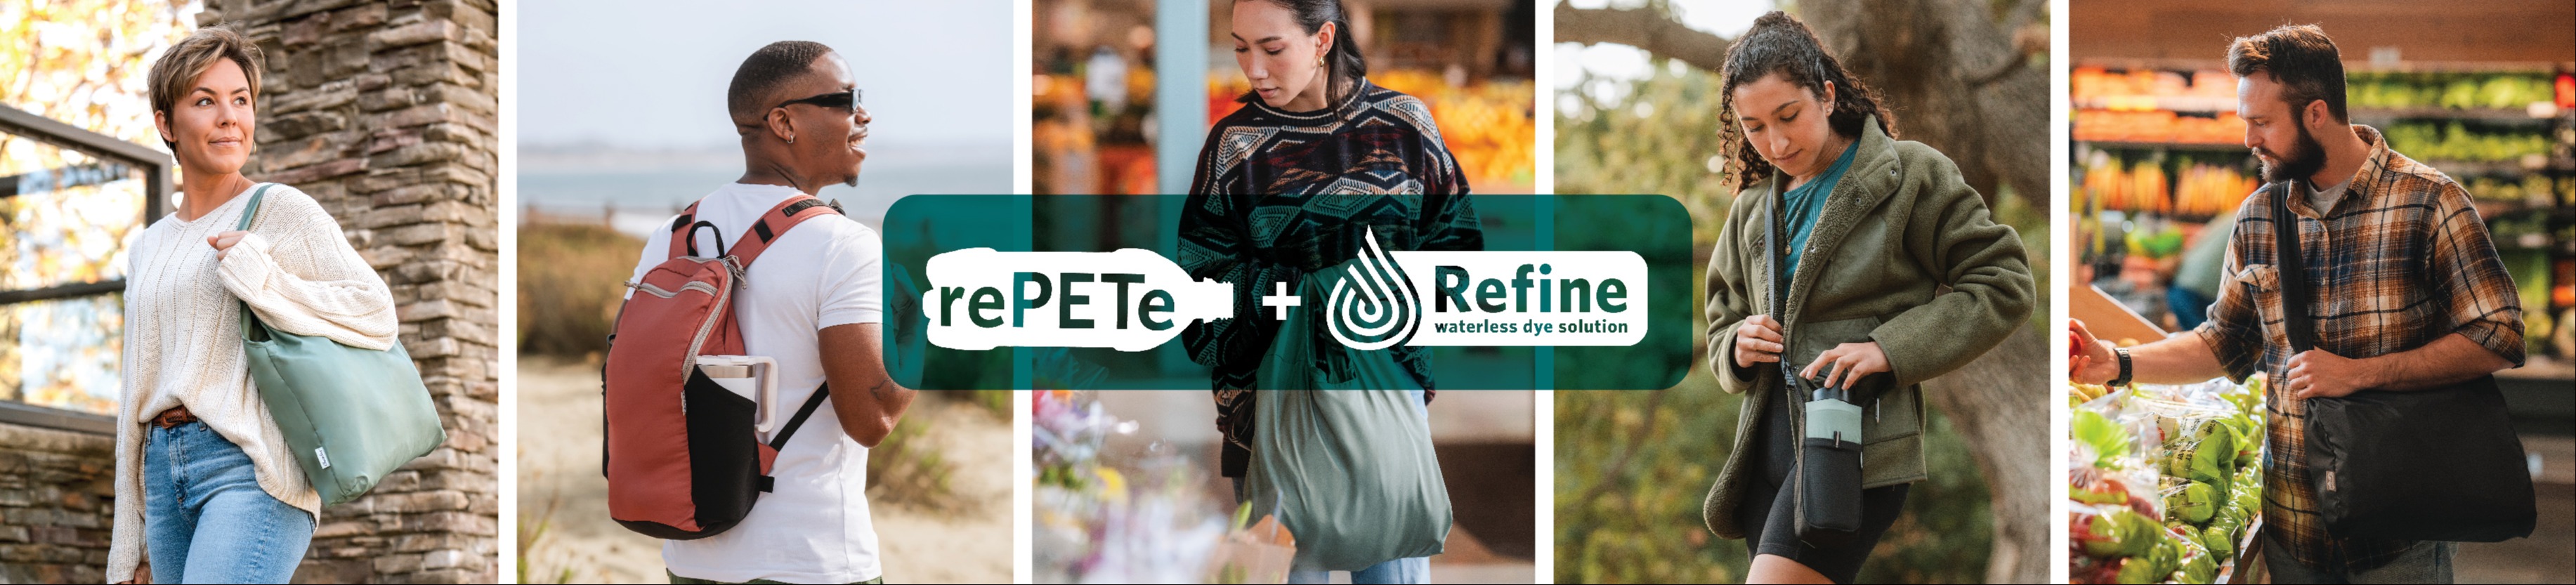 ChicoBag Launches Innovative & Inclusive Line of Eco-Friendly Products Crafted from rePETe™ + Refine™ Recycled Fabric 35